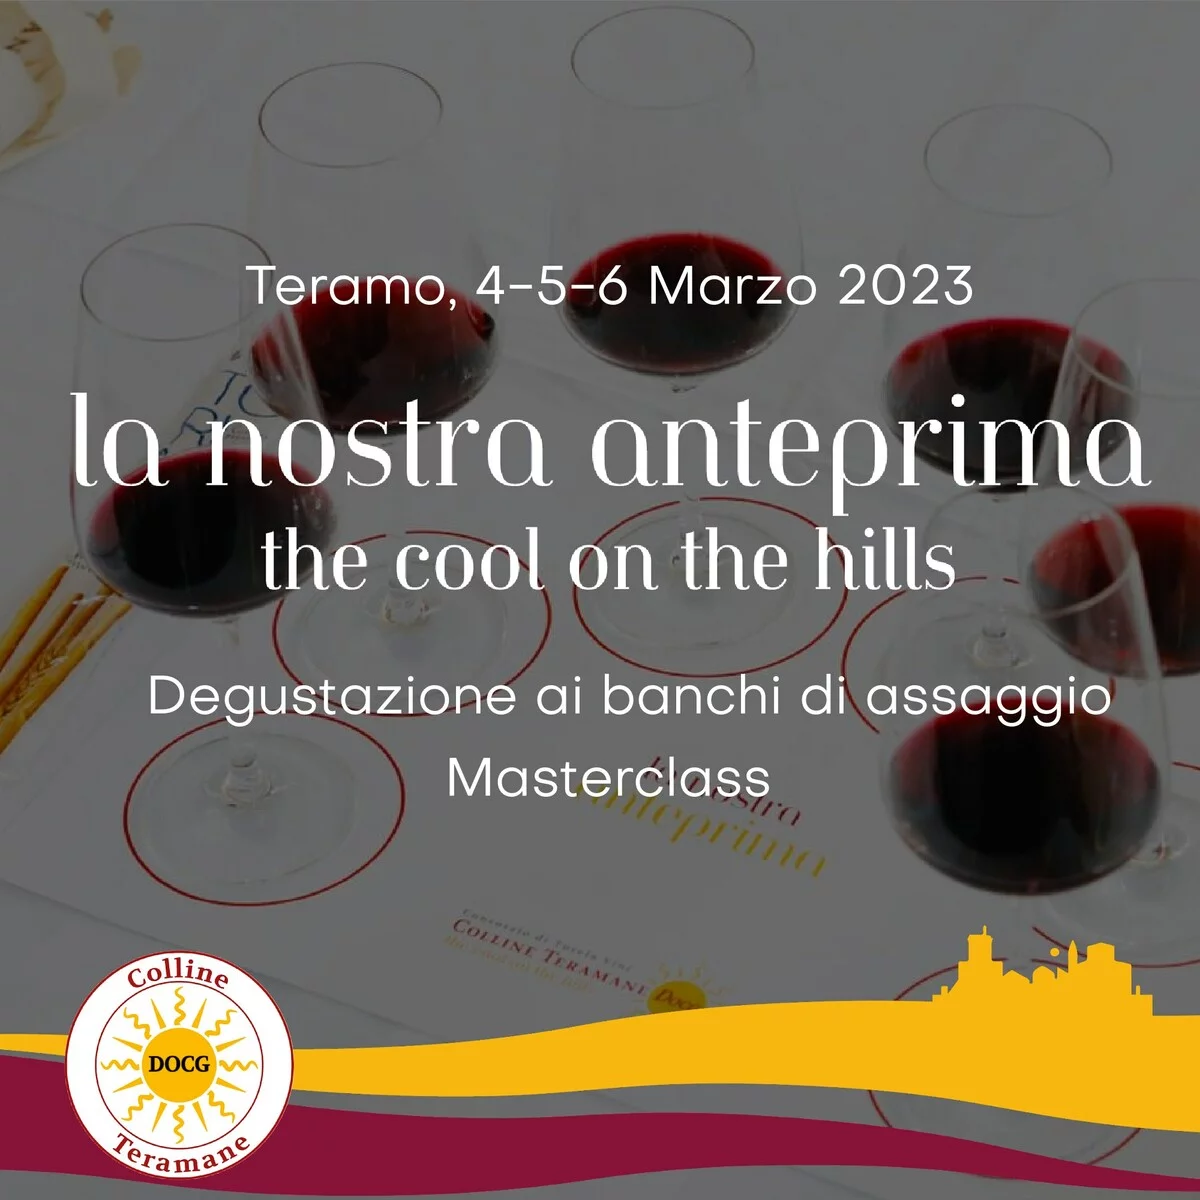 La Nostra anteprima - The cool on the hills